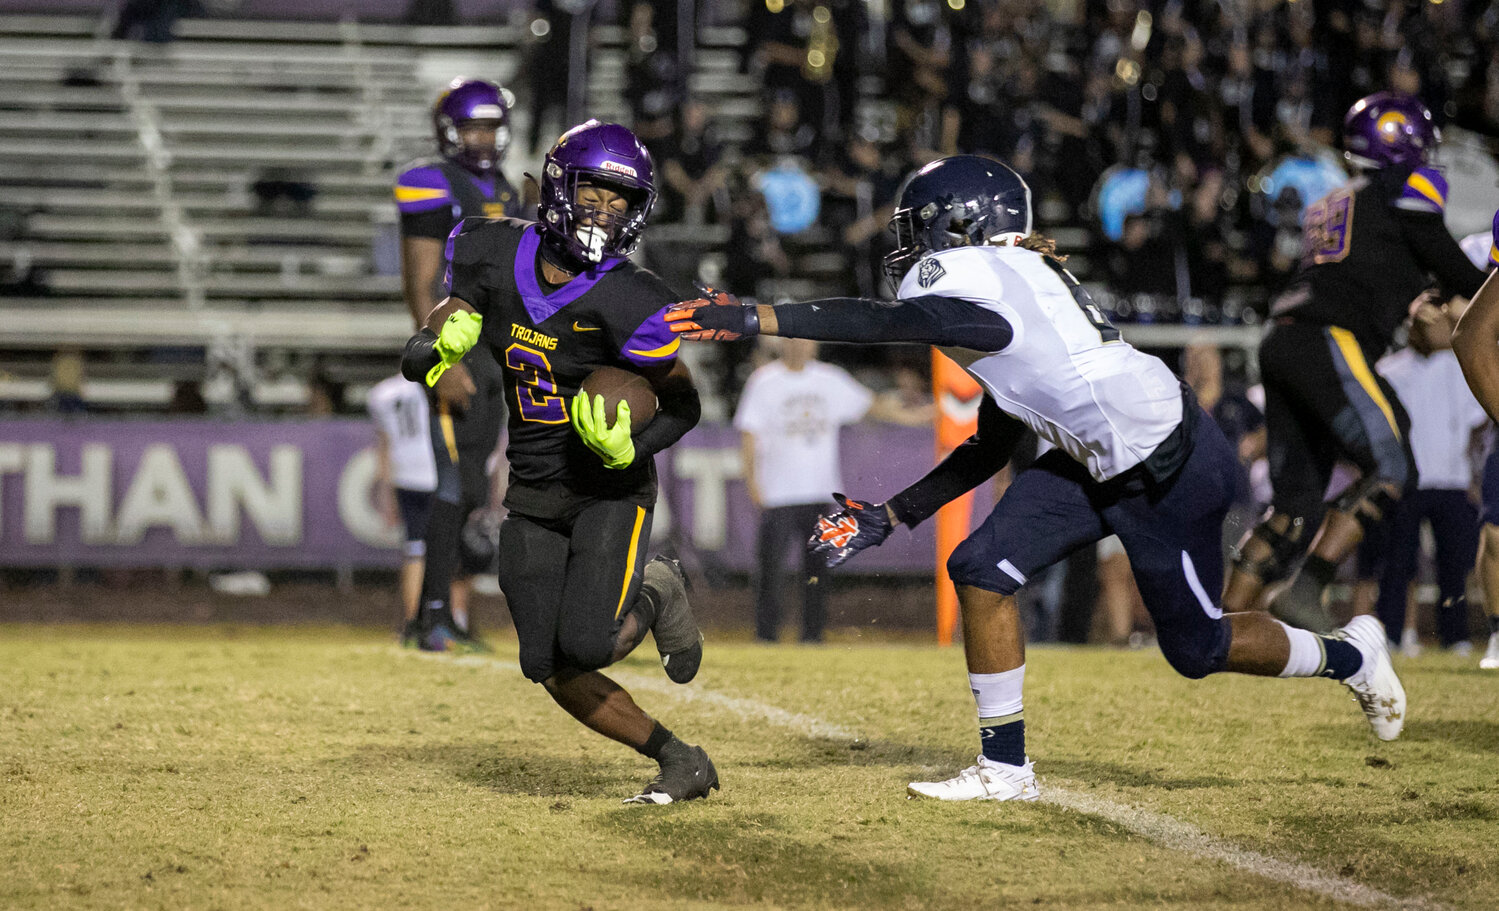 Foley senior Dereon Autrey reaches out to pull down Daphne sophomore Jaecyn Myles behind the line of scrimmage Friday night during the Class 7A Region 1 game between the Lions and Trojans. Autrey provided an interception returned for a touchdown to Foley’s region-finale efforts.